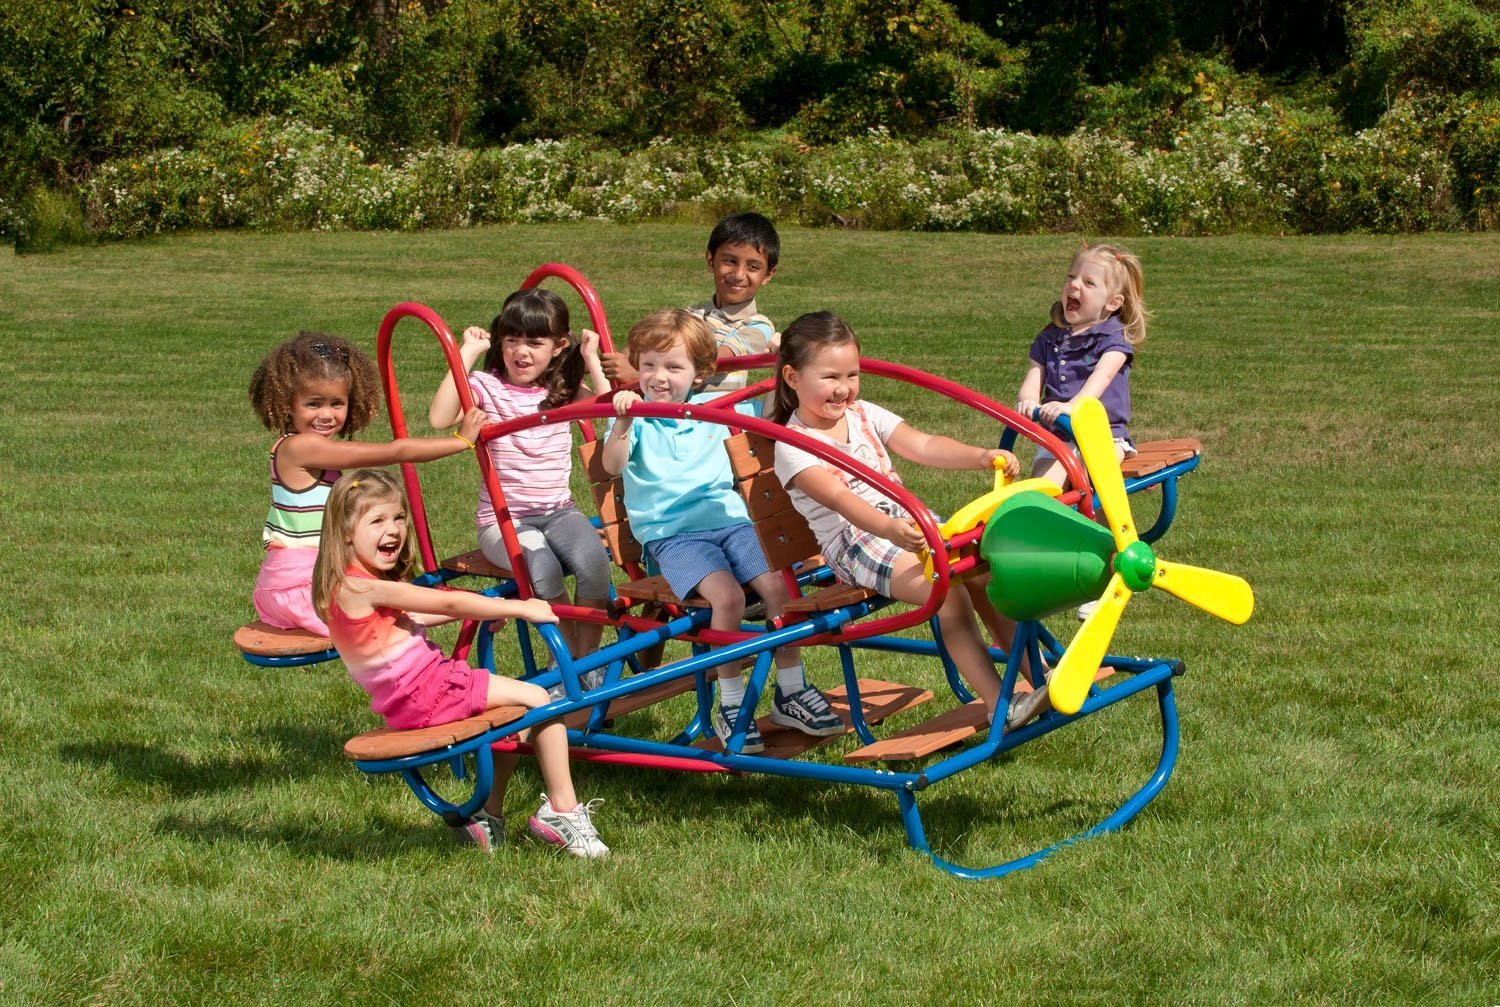 Cool Outdoor Toys For Kids
 What are The Best Outdoor Toys for Kids to Play in the Summer